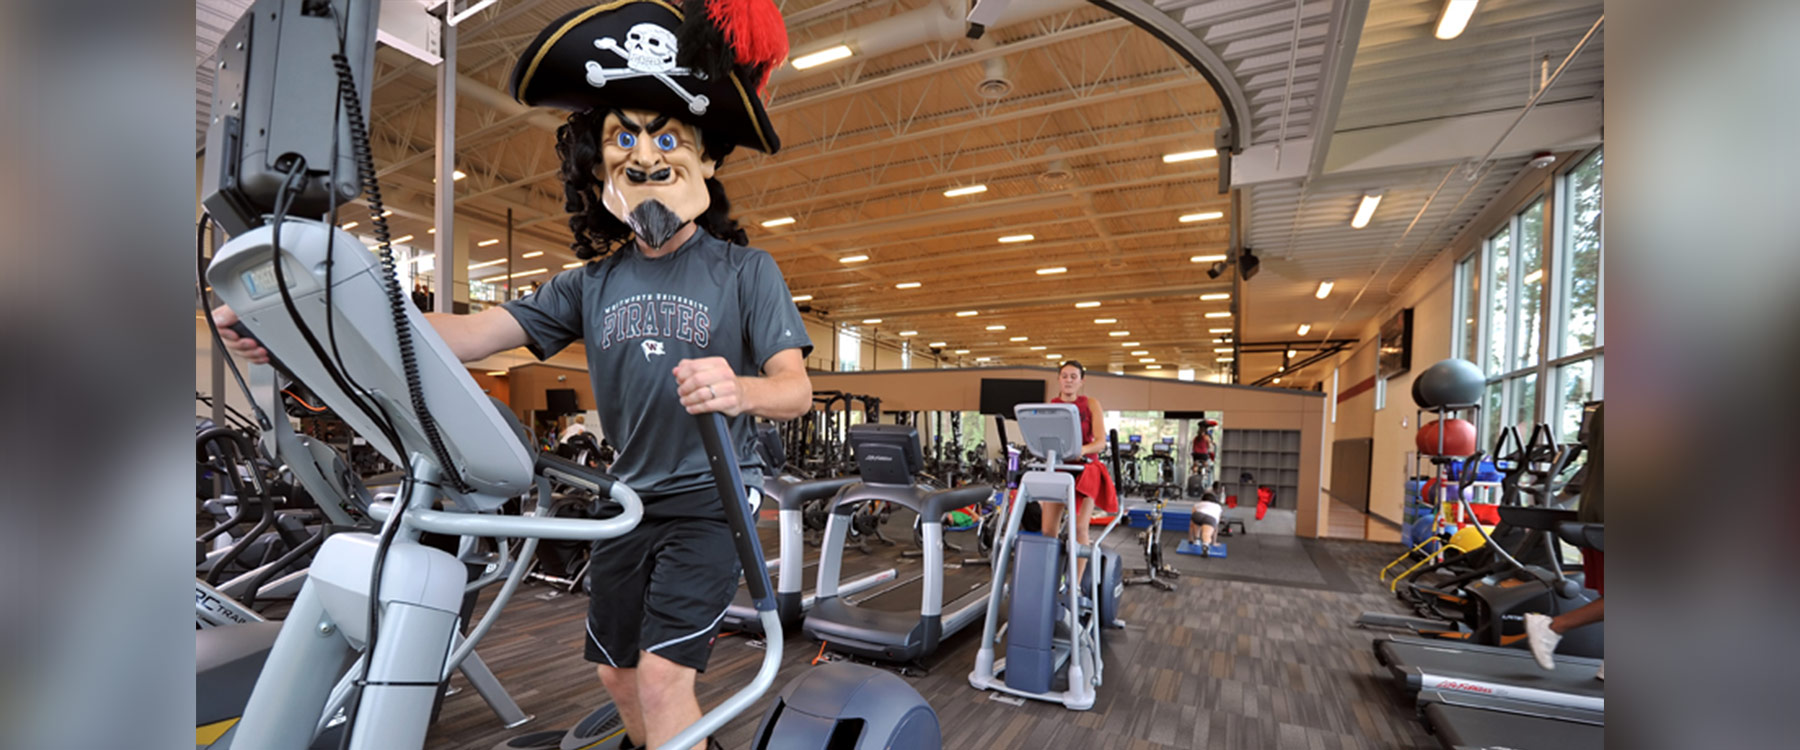 A student wearing the pirate mascot head works out on an elliptical machine.